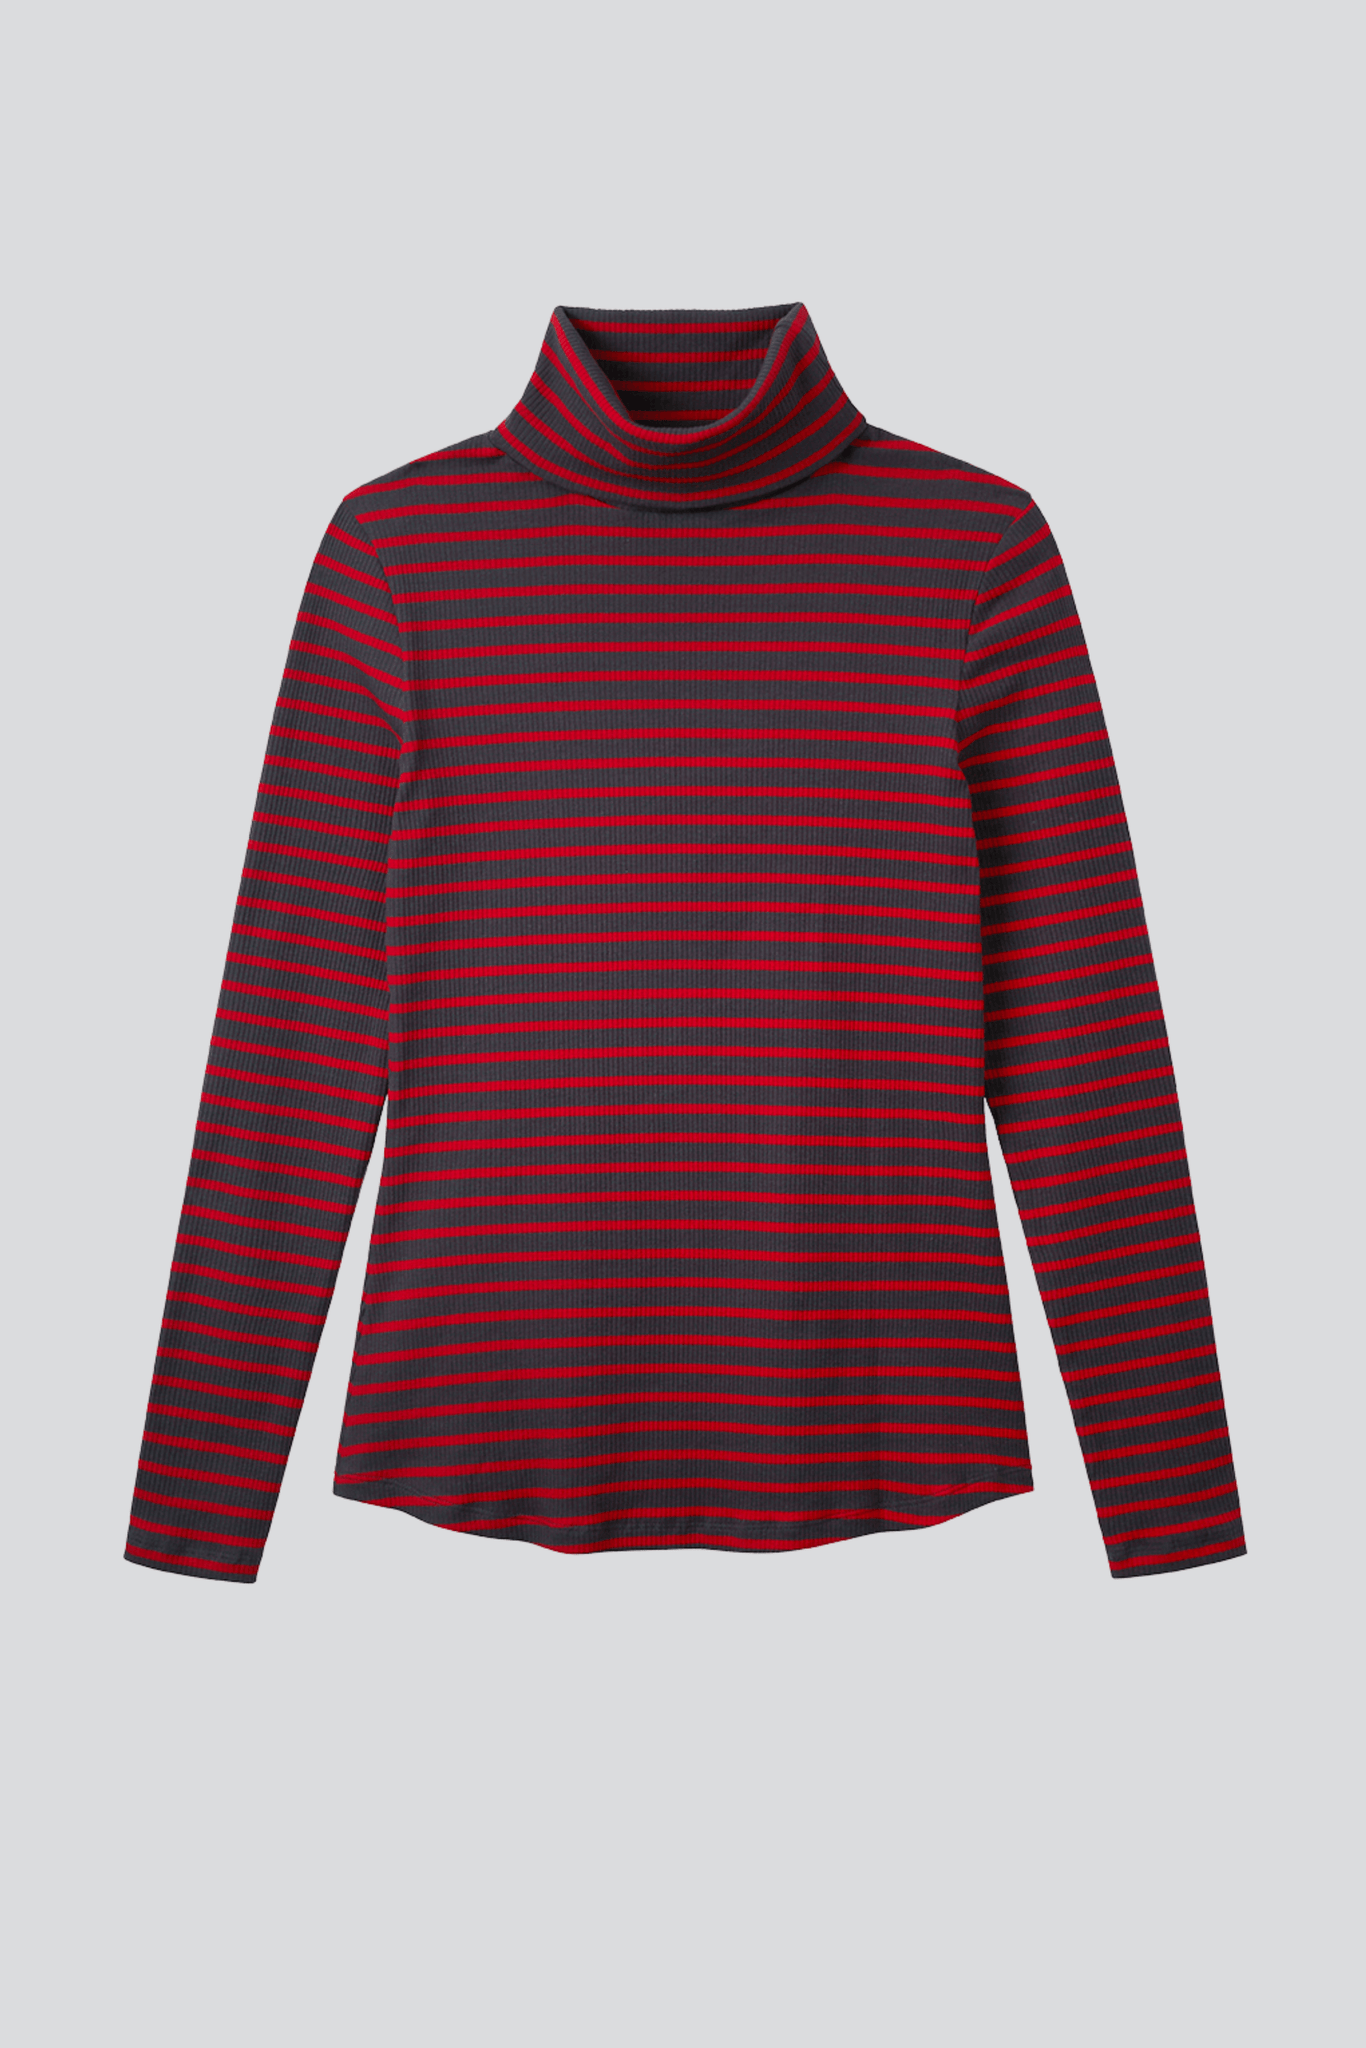 Women's Striped Cotton Roll Neck Top Red and Grey - Quality Long Sleeve Roll Neck Top - Flattering Long Sleeve Roll Neck Top by Lavender Hill Clothing